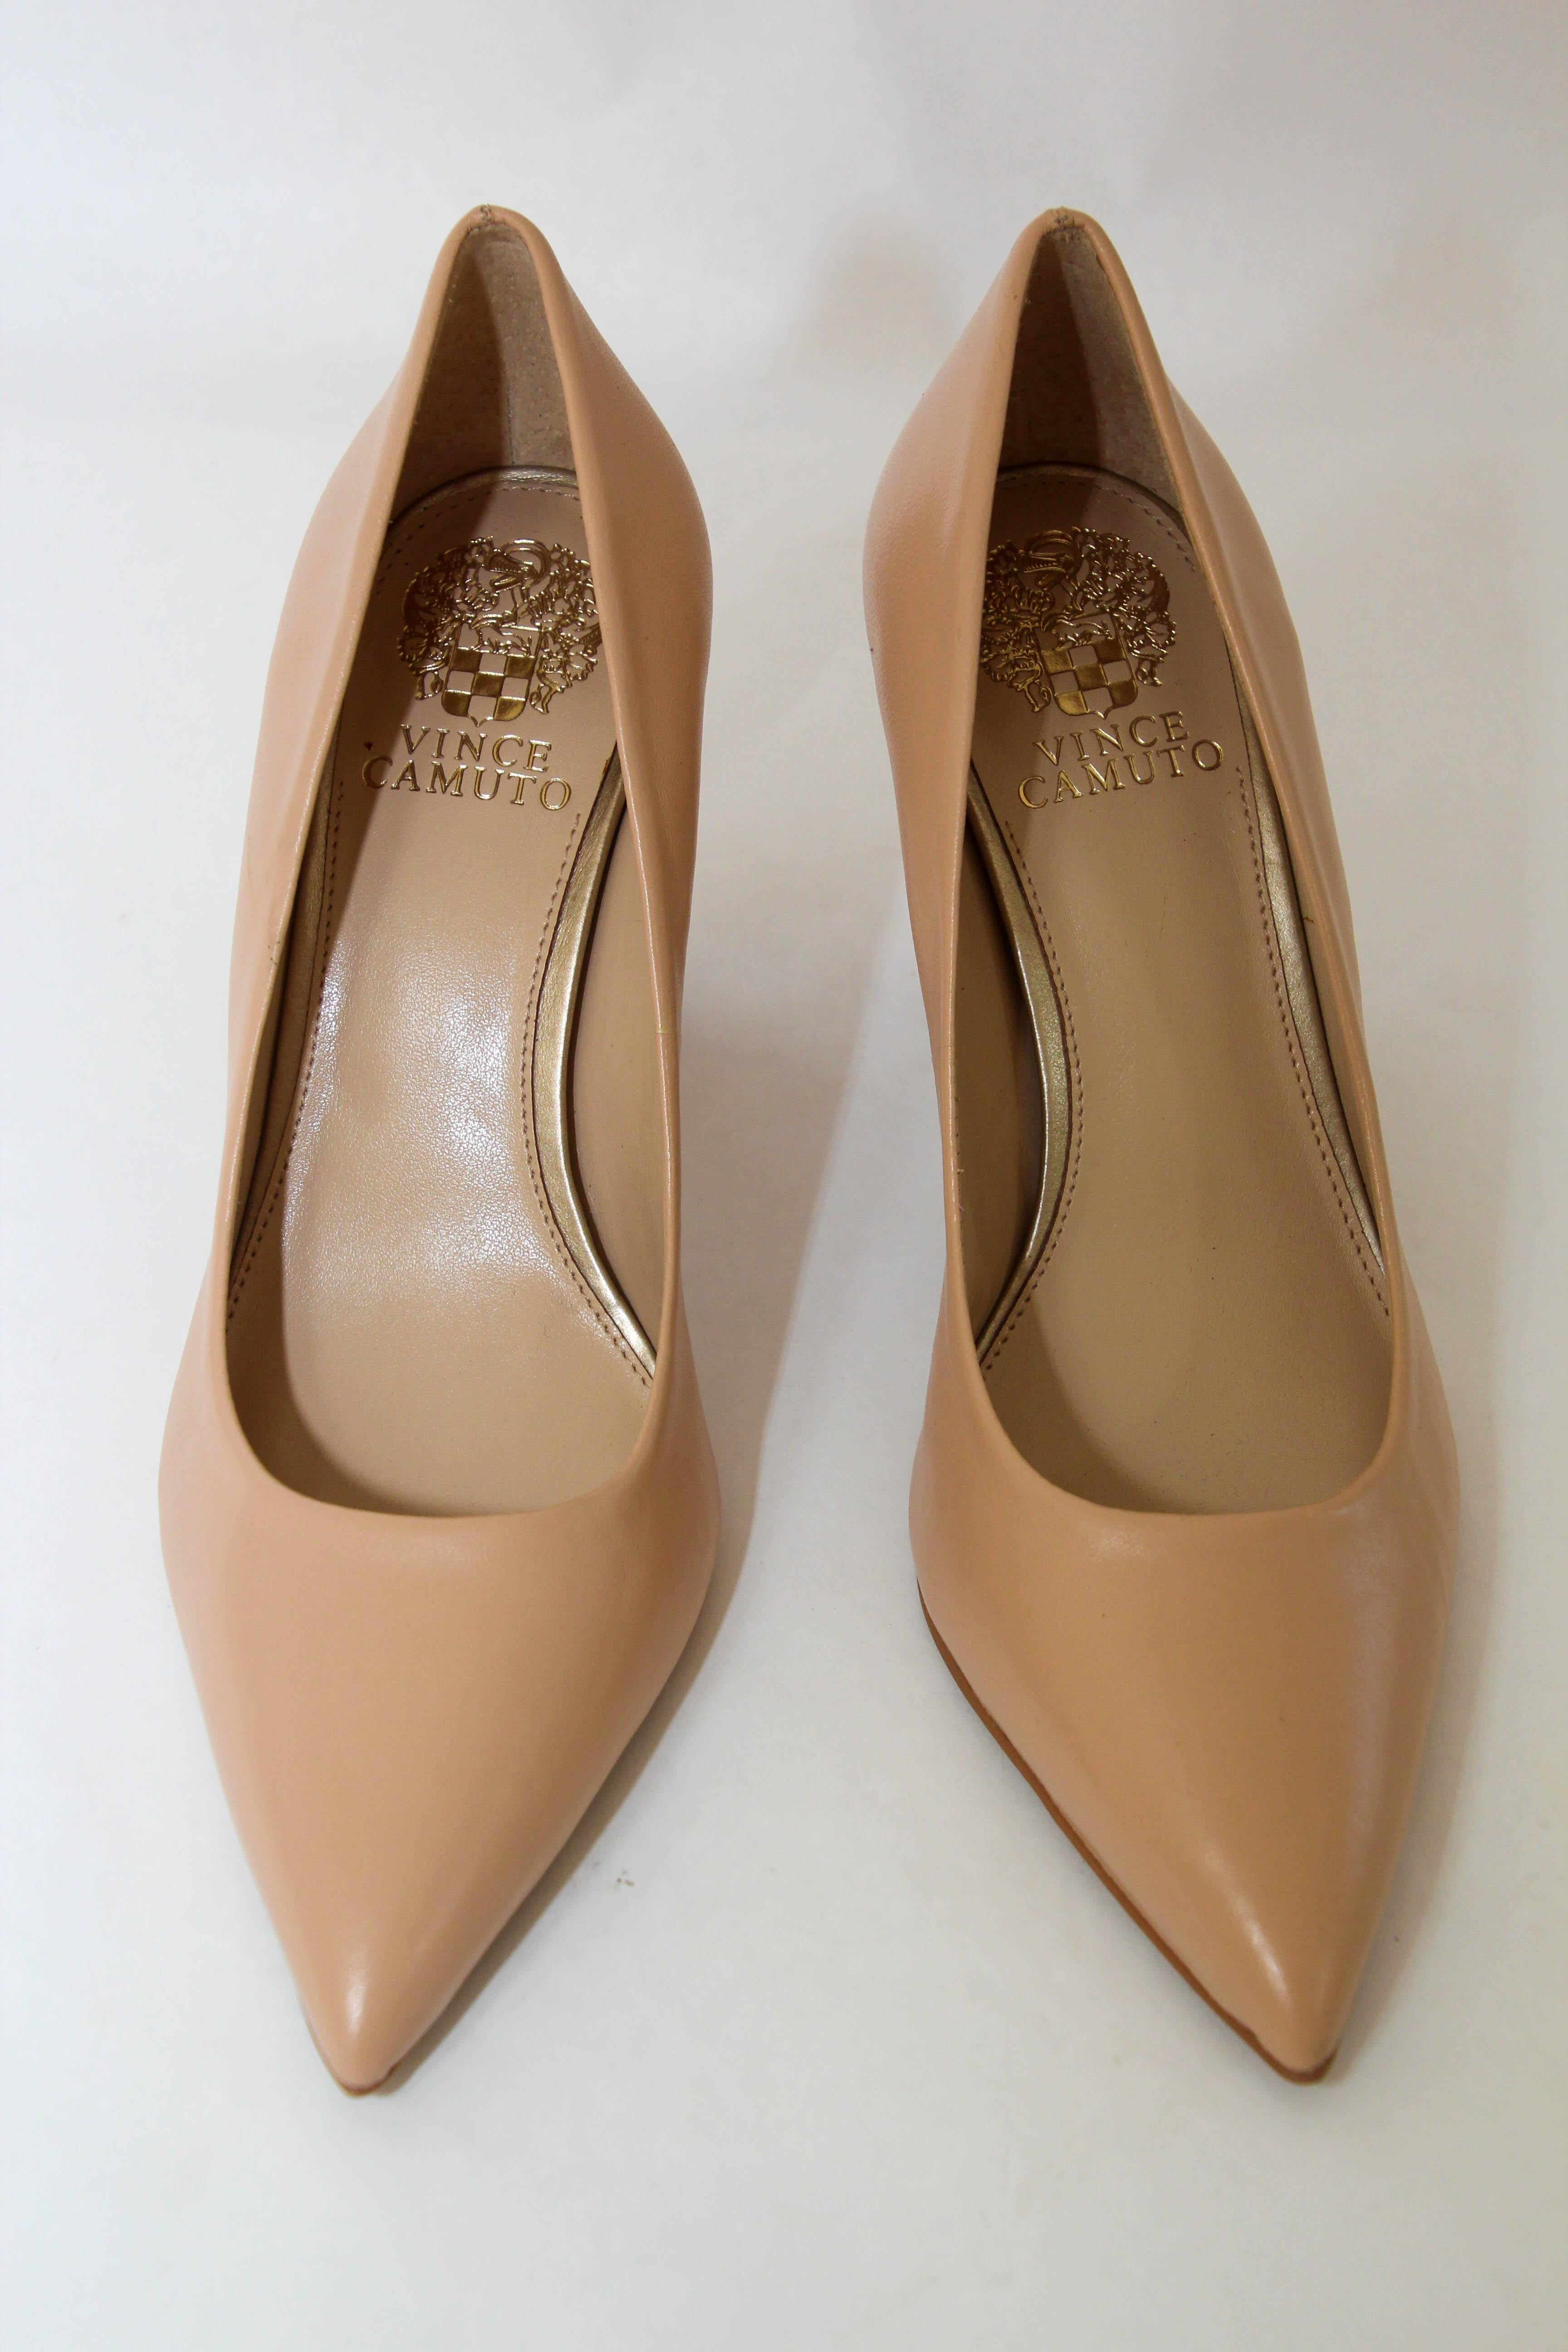 Vince Camuto Tan Leather Heel Pointed Toe Pump.
Vince Camuto Beige nude tan Leather Mid Heel Pointed Toe Pump
3.5'' Flared heel.
Condition: new
Size: 8.5 M.
Made in Brazil.
The traditional pump receives an innovative update with an architectural